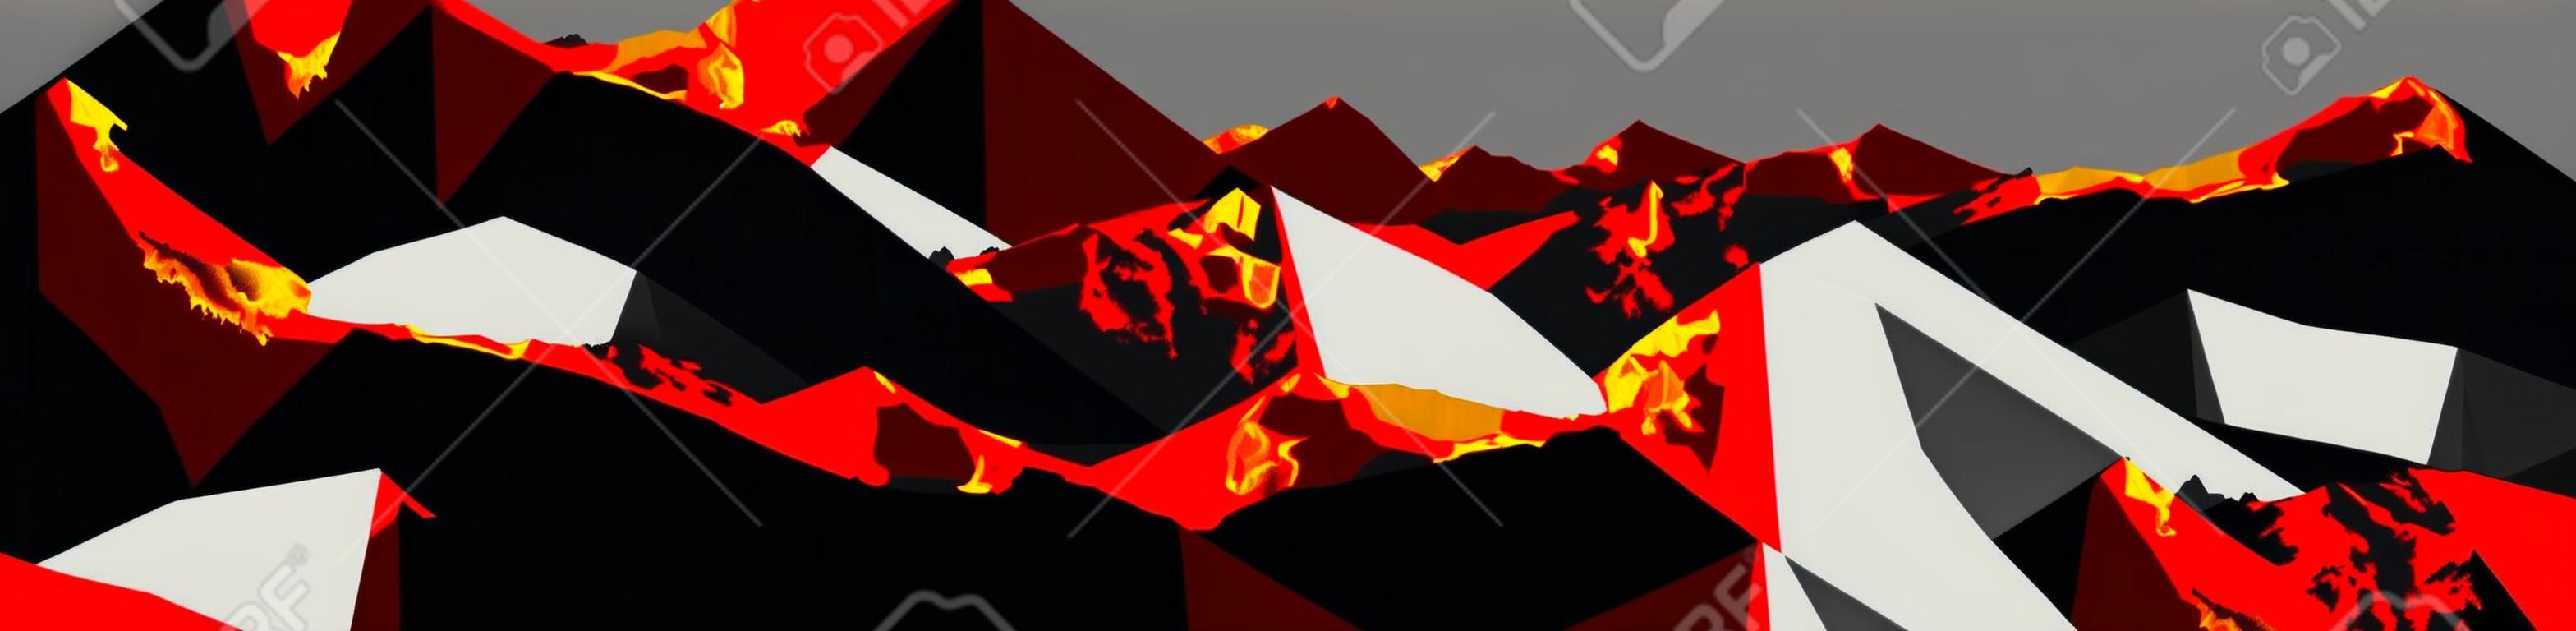 Abstract  of mountain ranges, volcano with lava landscape, red and black tones. Vector background